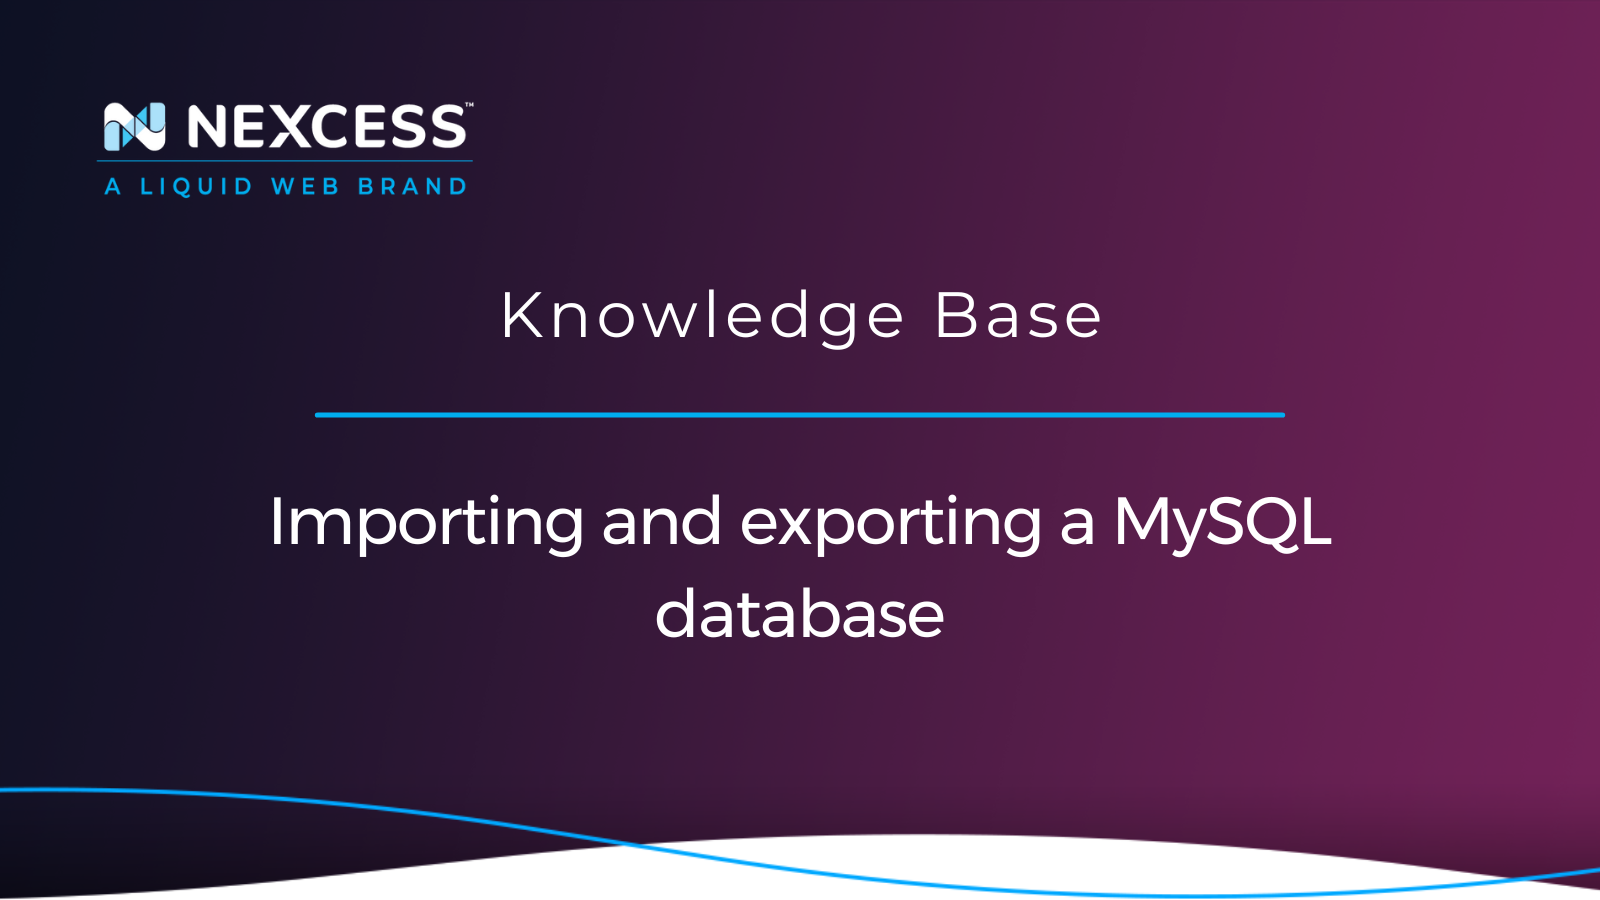 Importing and exporting a MySQL database